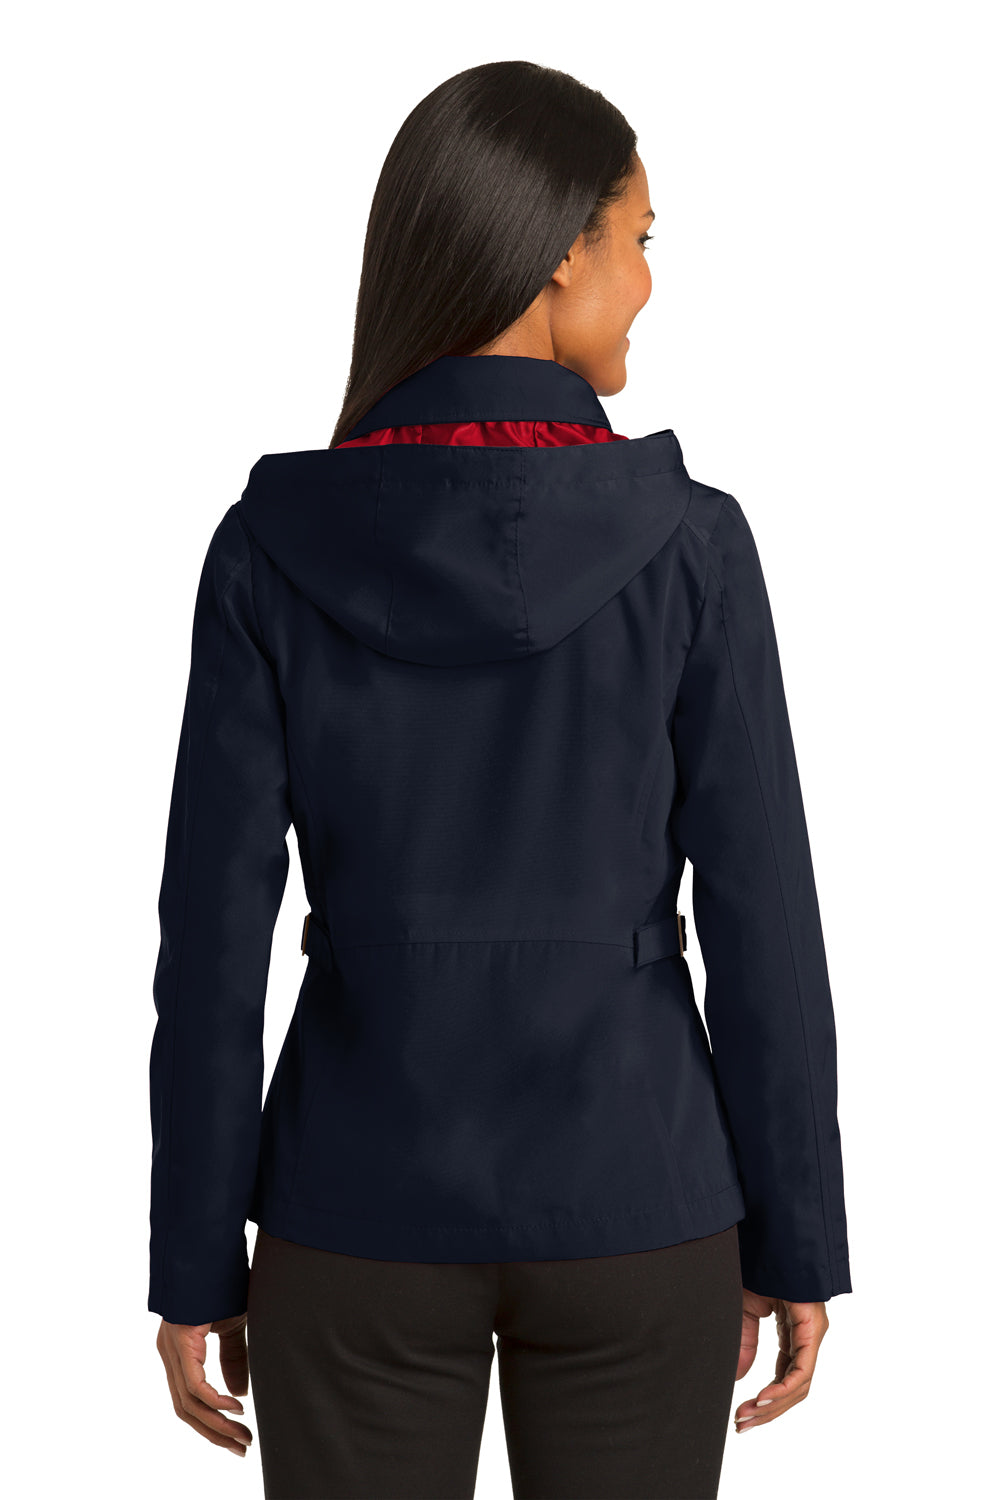 Port Authority L764 Womens Legacy Wind & Water Resistant Full Zip Hooded Jacket Navy Blue Back